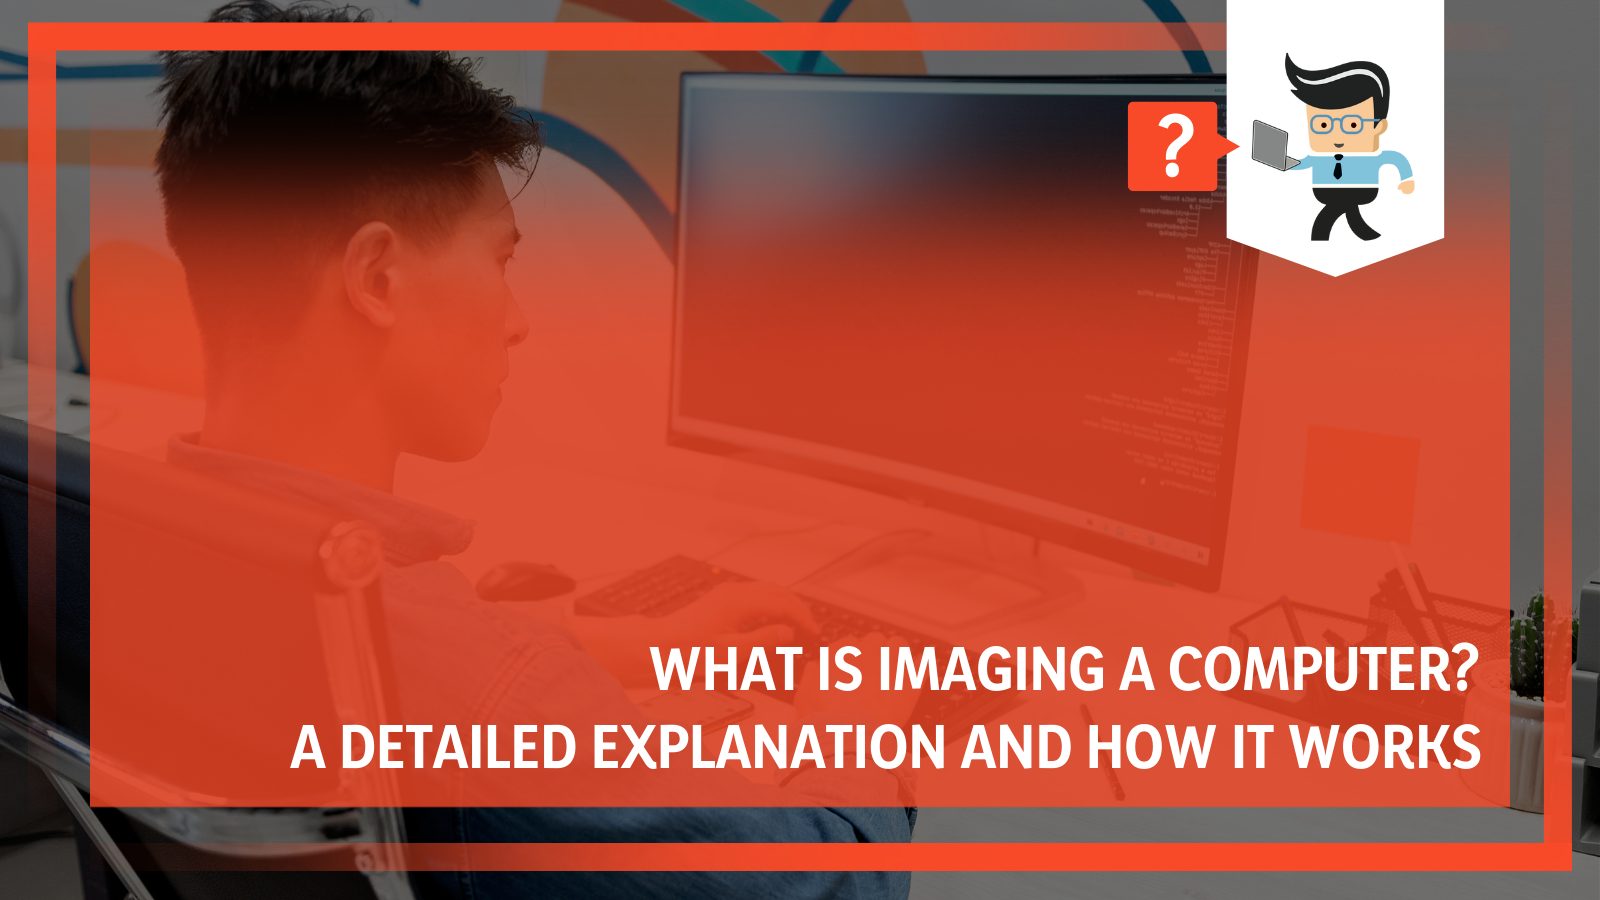 What Is Imaging a Computer